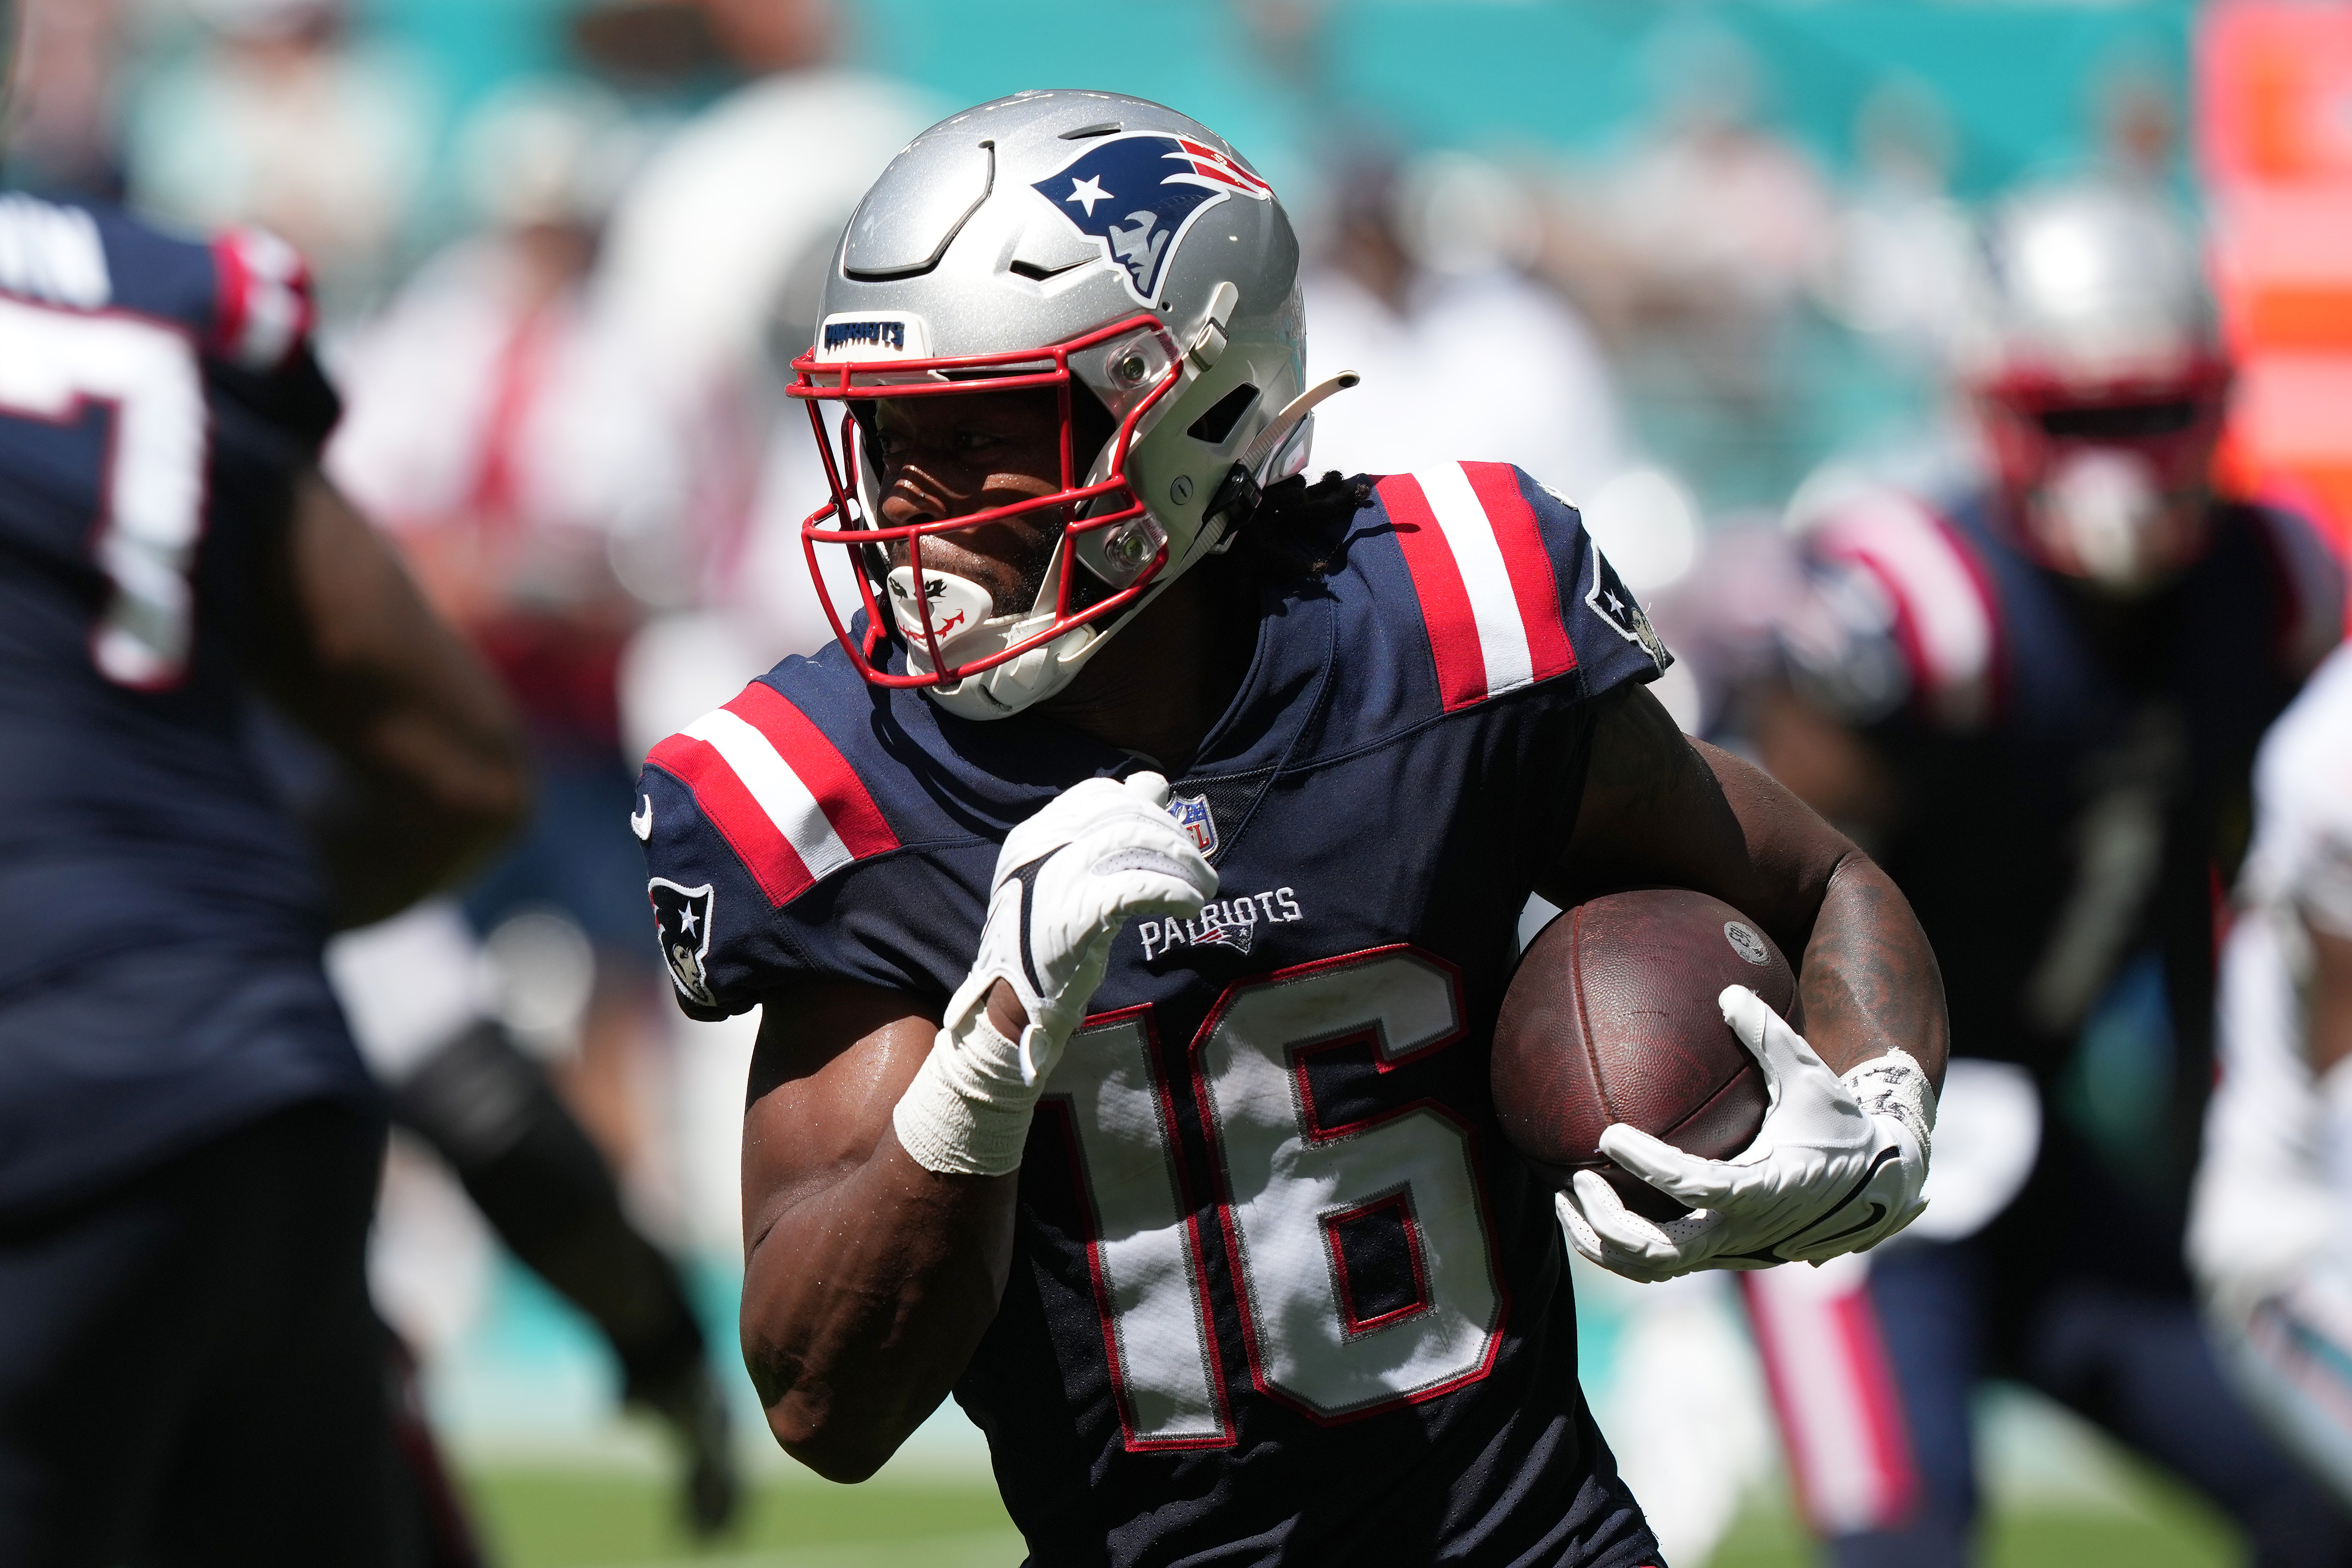 Jakobi Meyers #16 of the New England Patriots rushes the football in the fourth quarter of the game against the Miami Dolphins at Hard Rock Stadium on September 11, 2022 in Miami Gardens, Florida.